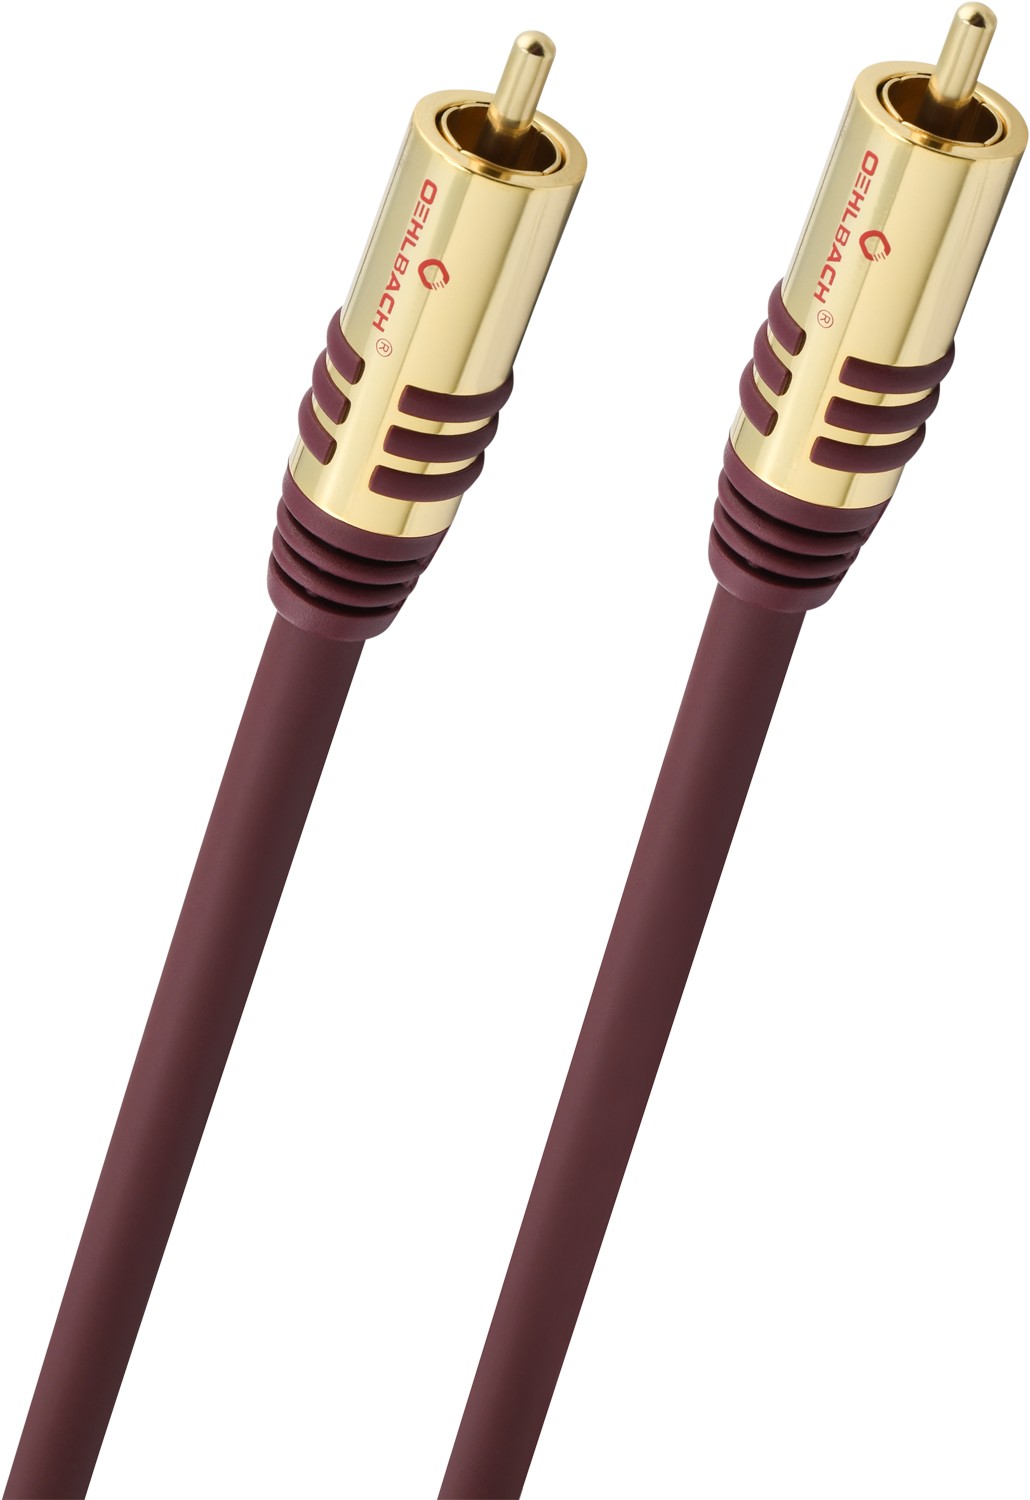 Кабели межблочные аудио Oehlbach PERFORMANCE NF Sub-cable cinch/cinch, 3.0m mono red, D1C20533 кабели межблочные аудио oehlbach excellence select opto link toslink cable 3 0m sw d1c33134